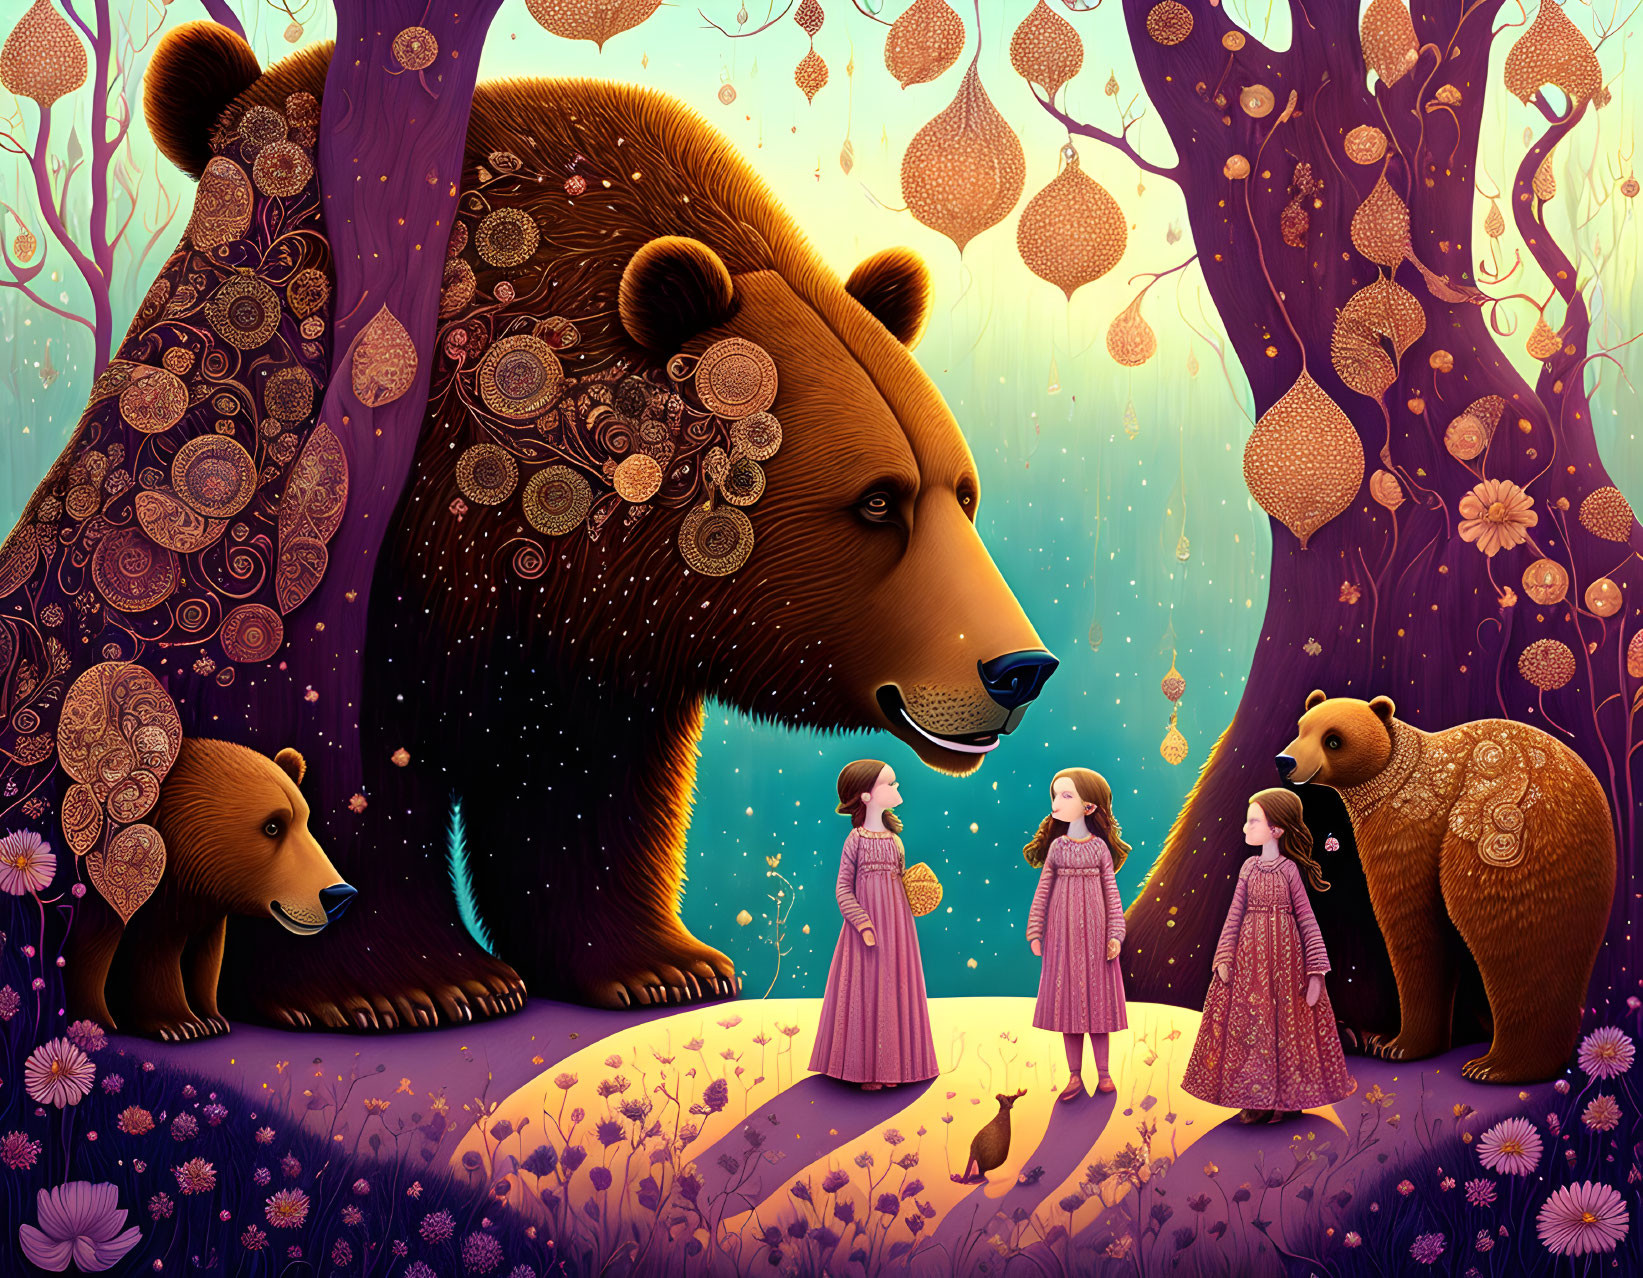  girl and the brown bear,